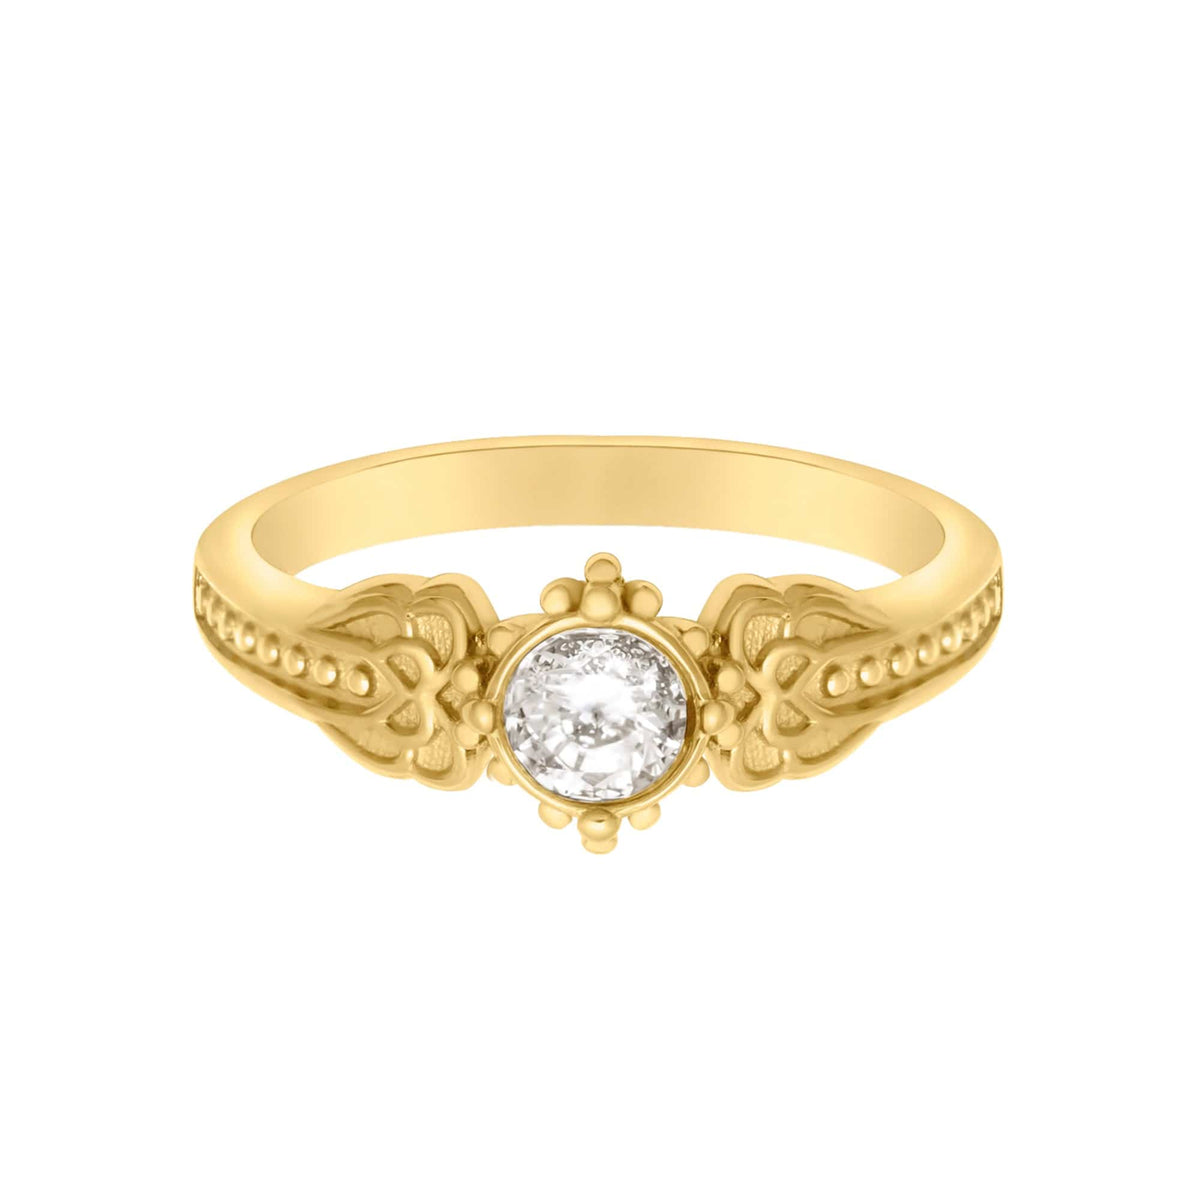 BohoMoon Stainless Steel Aaliyah Ring Gold / US 6 / UK L / EUR 51 (small)